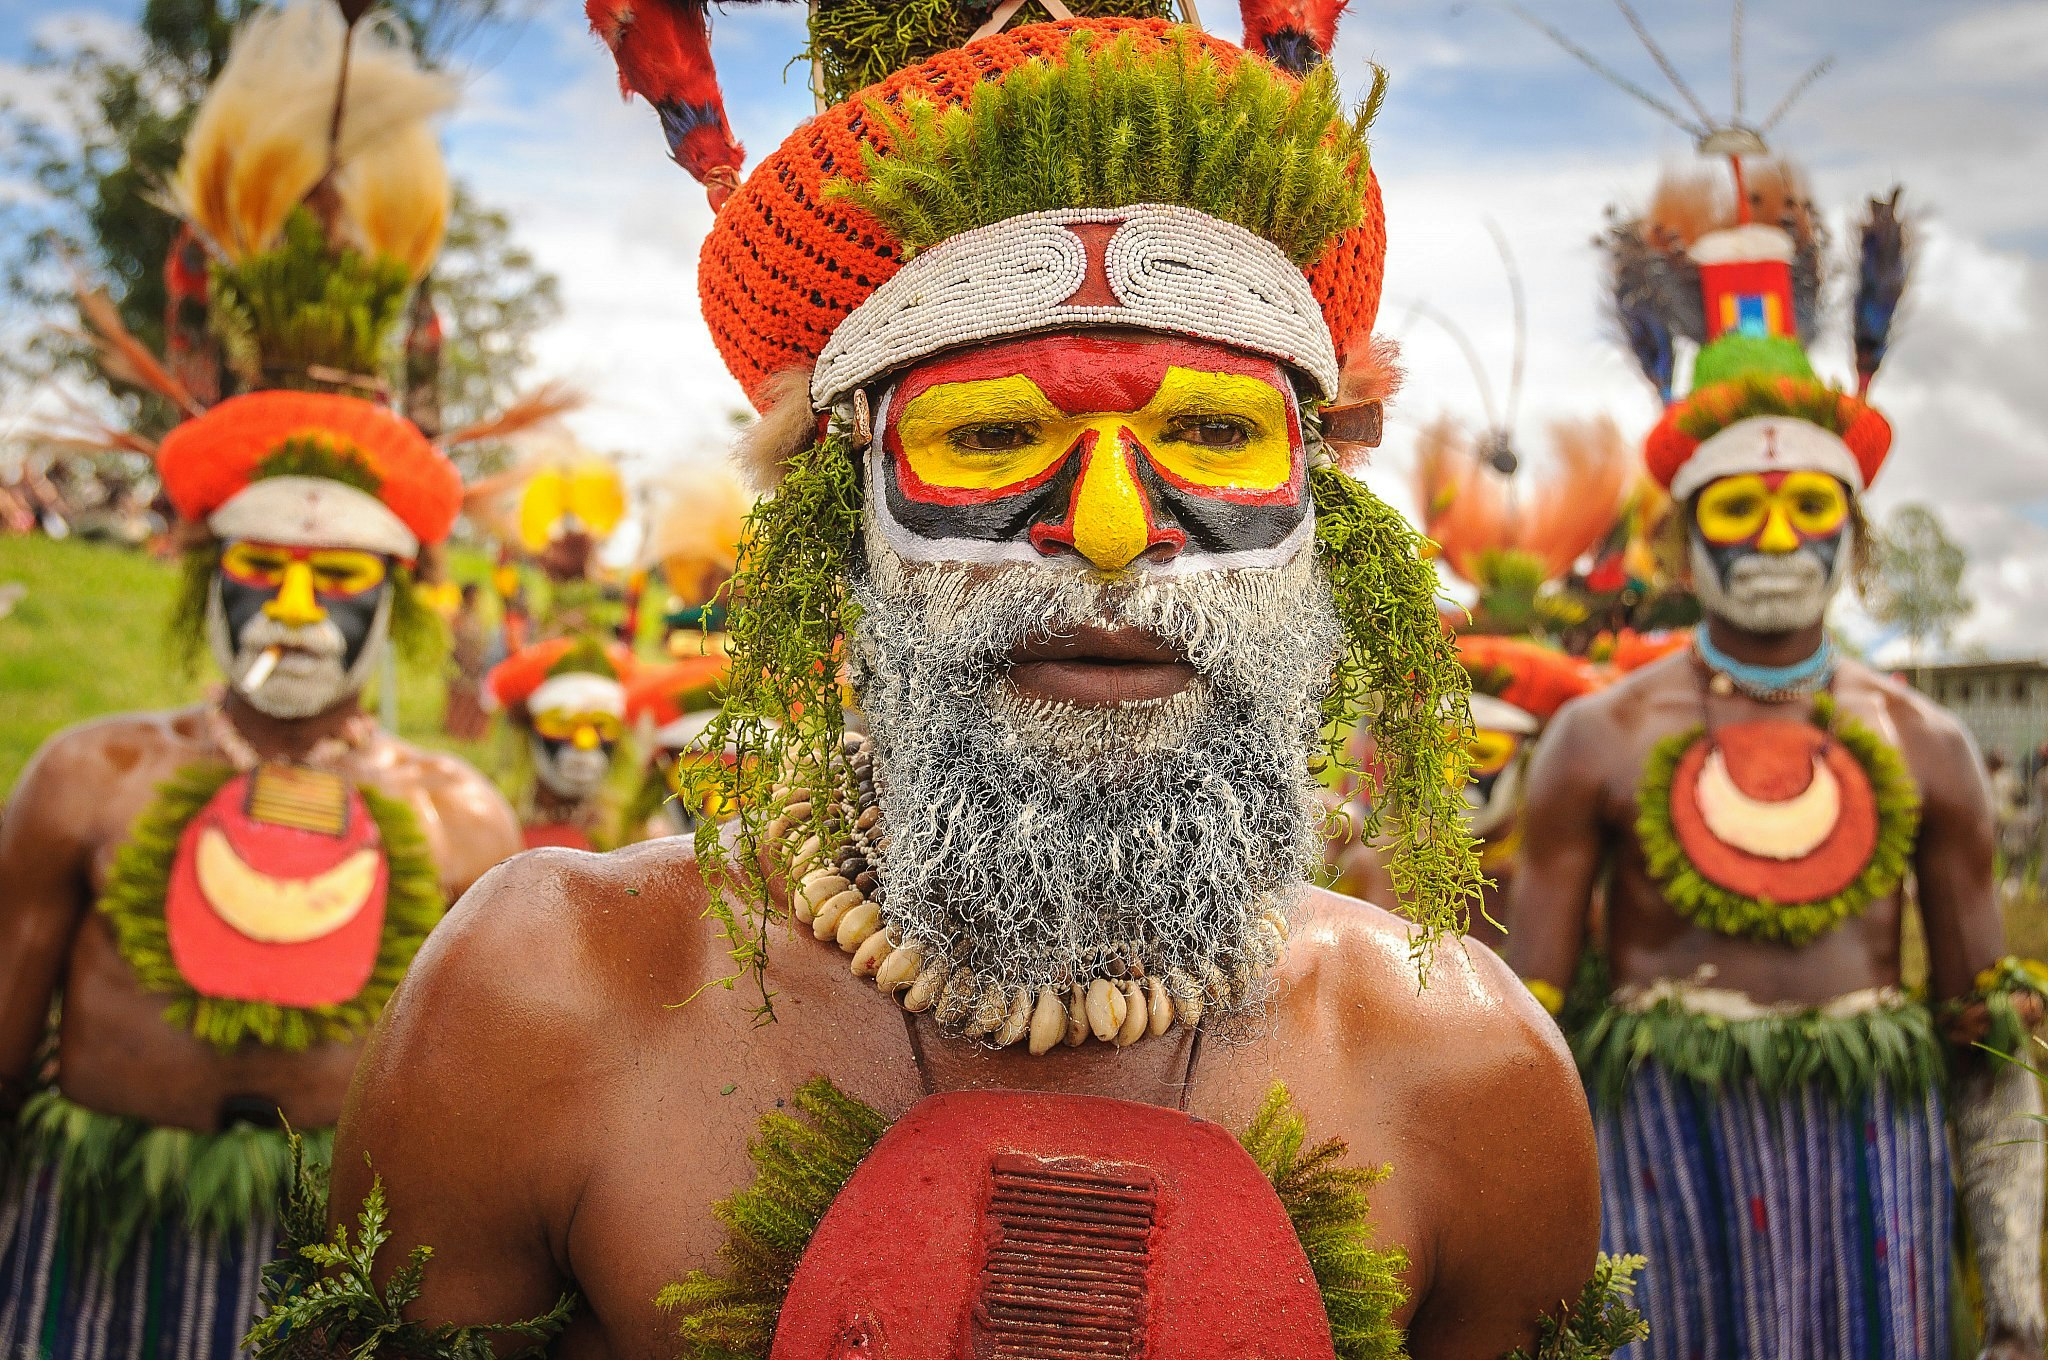 Tribesmen in traditional dress at a Mt Hagen sing-sing in Papua New Guinea.